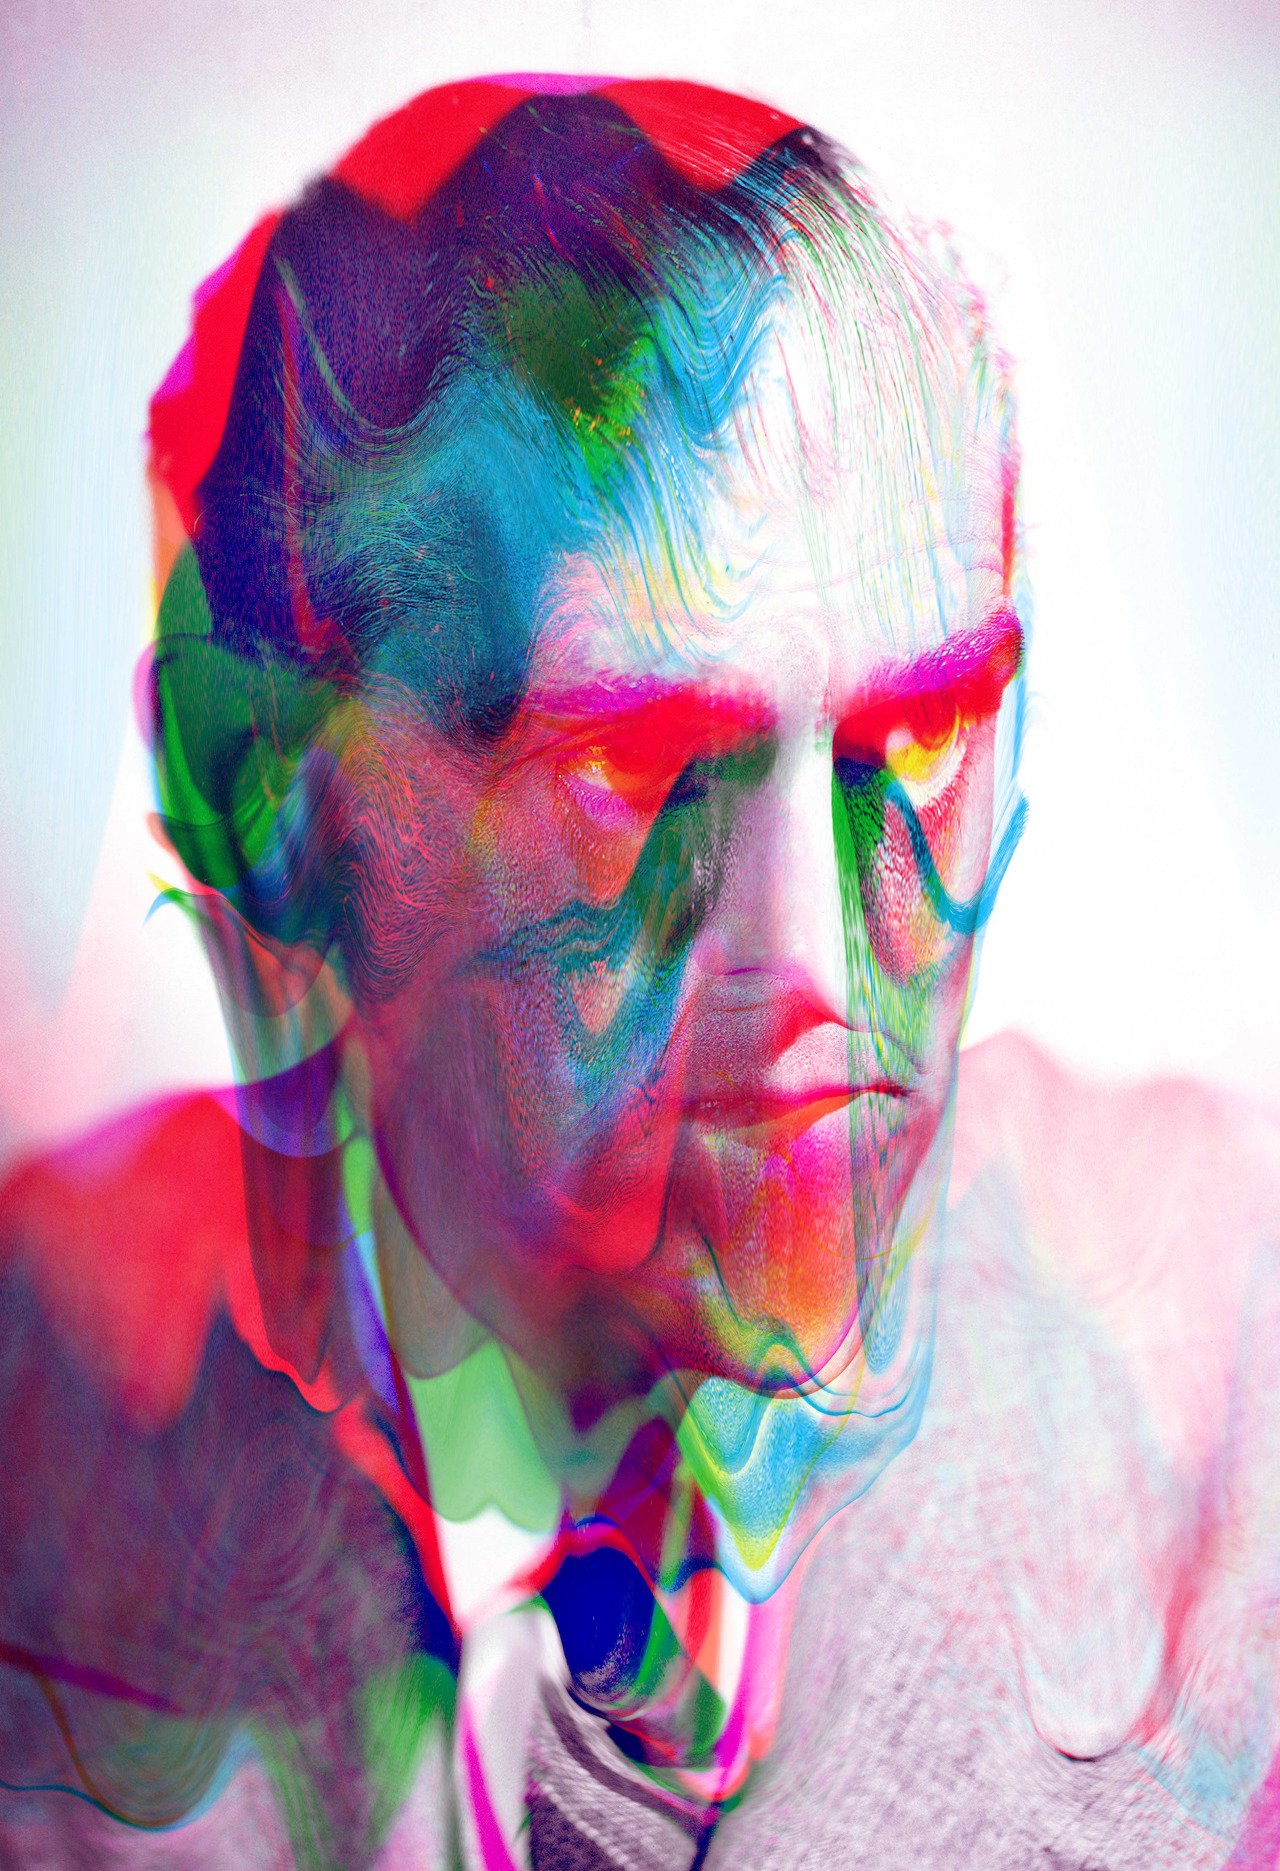 The Psychedelic Digital Portraits Of Tyler Spangler - Art-Sheep